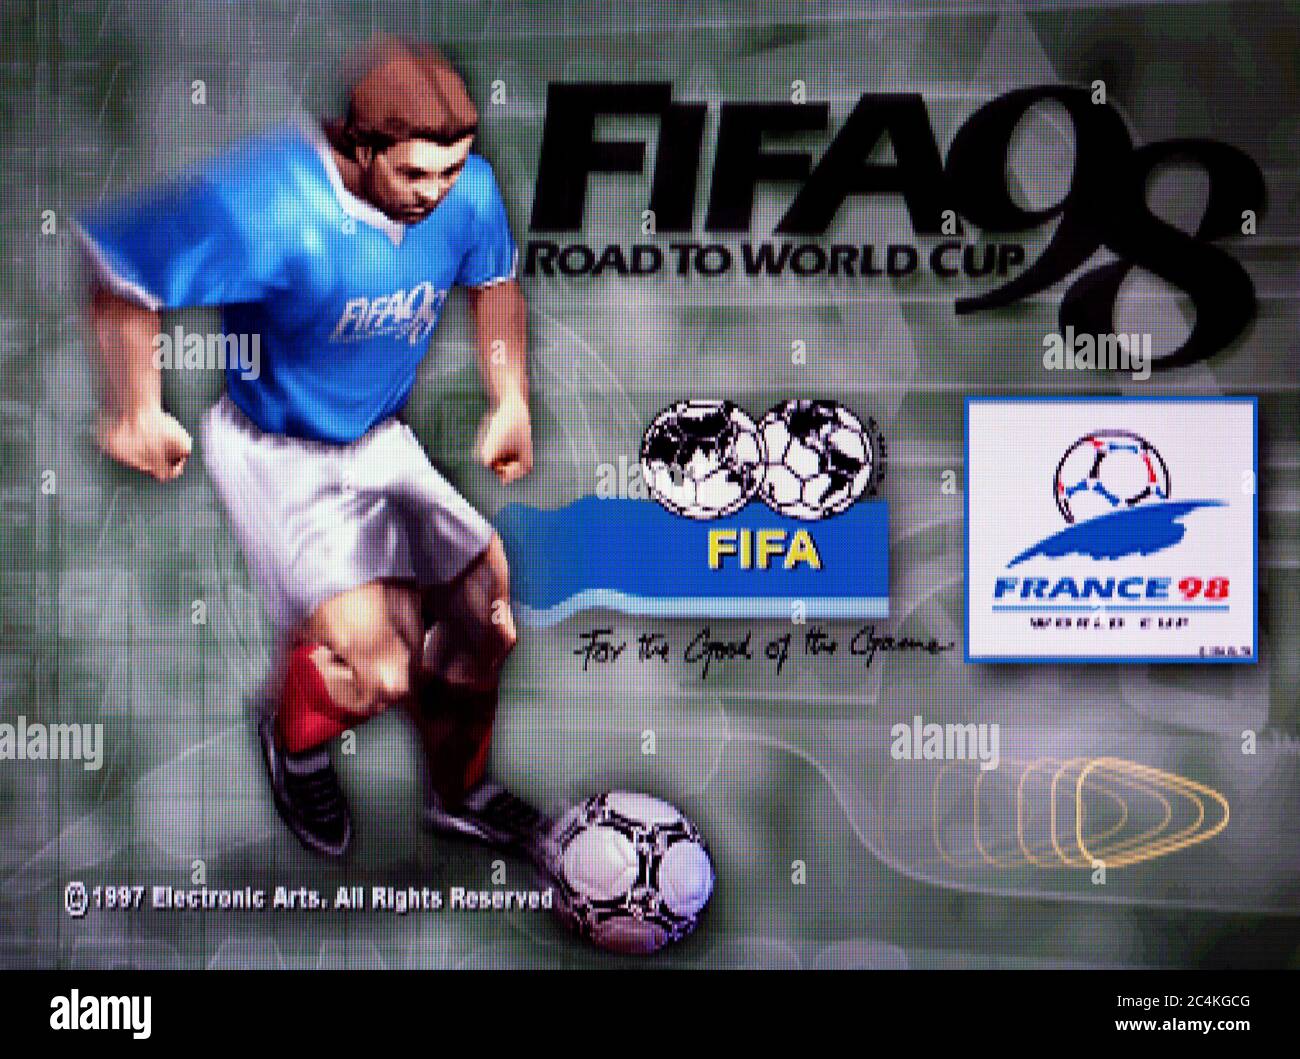 krysantemum diameter vitalitet FIFA 98 Road to World Cup - Sony Playstation 1 PS1 PSX - Editorial use only  Stock Photo - Alamy